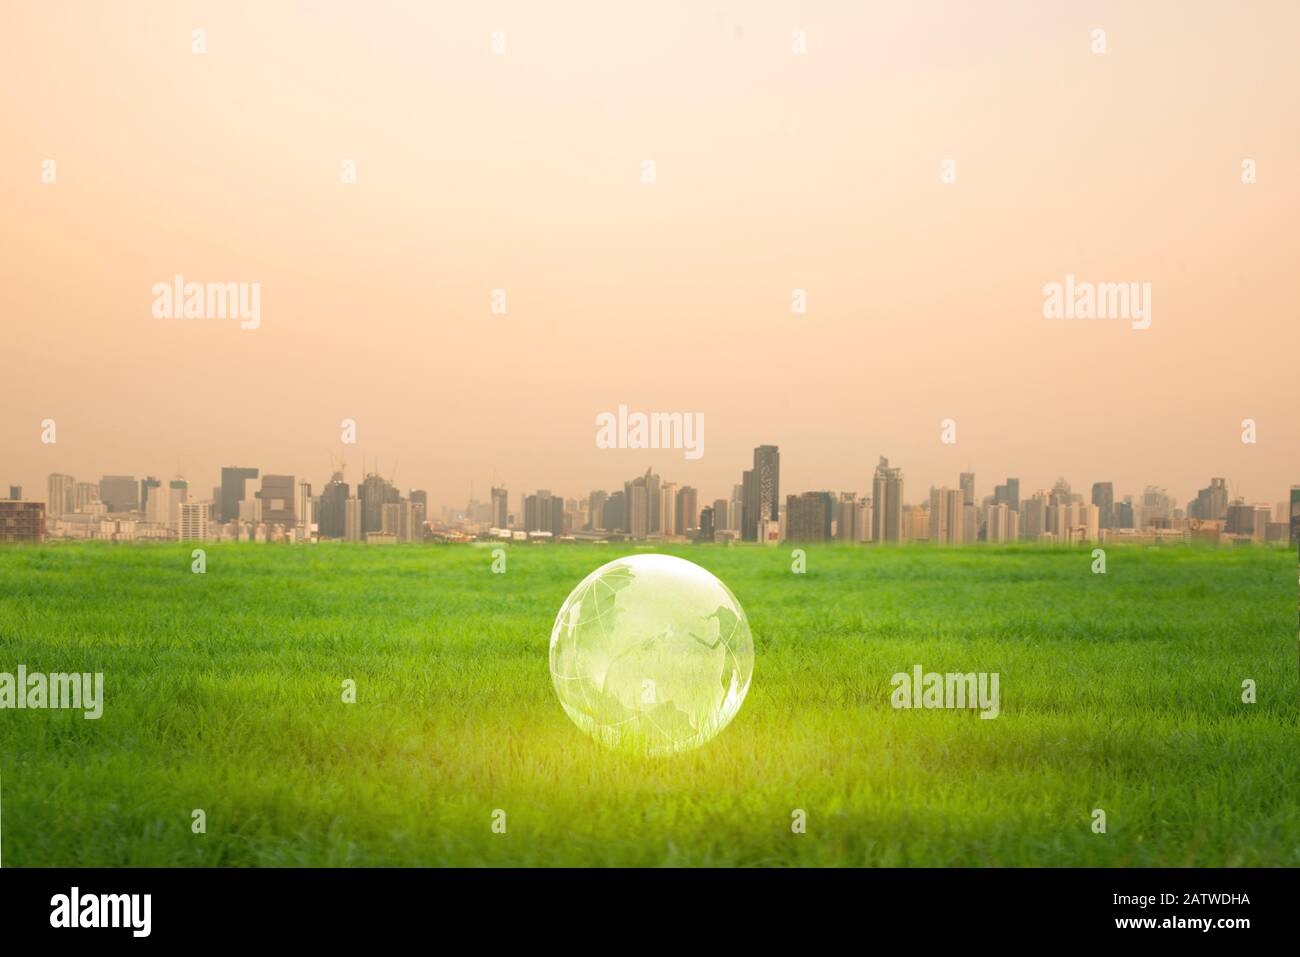 The  globe with the background of many large building. Global warming and pollution theme . Conceptual image symbolizing global warming leading to des Stock Photo